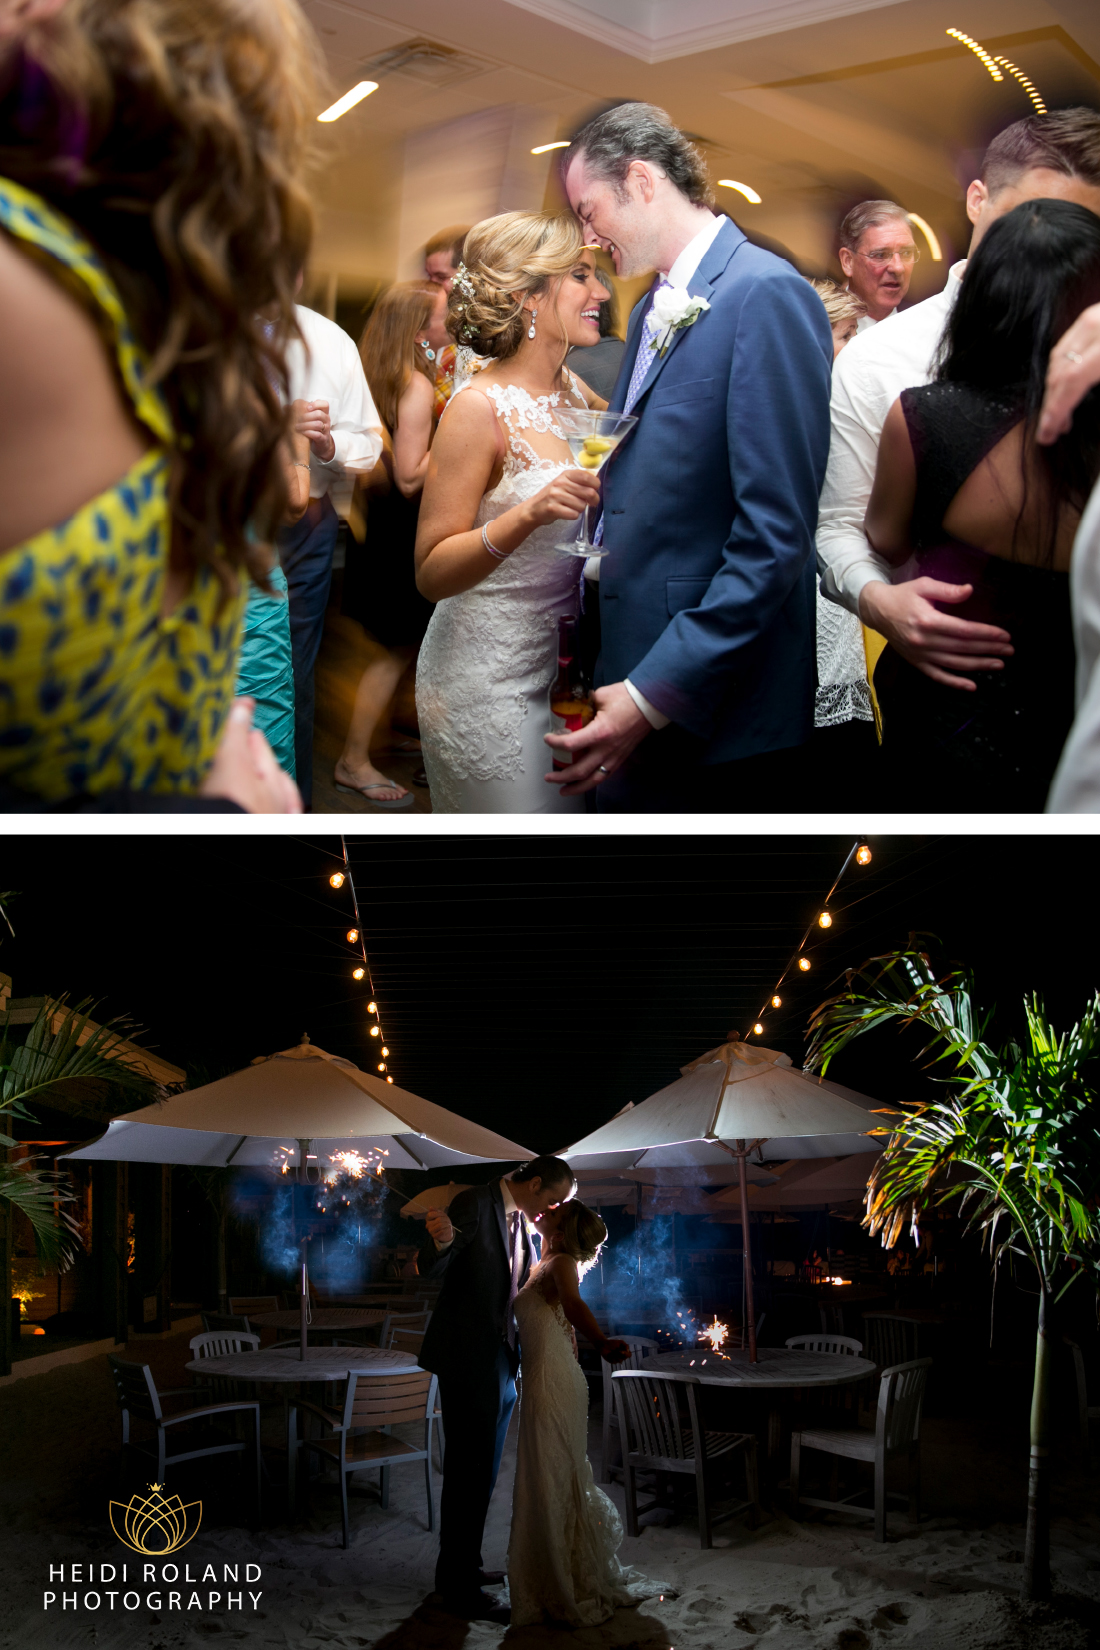 Icona Golden Inn Avalon NJ bride and groom dancing and night photo